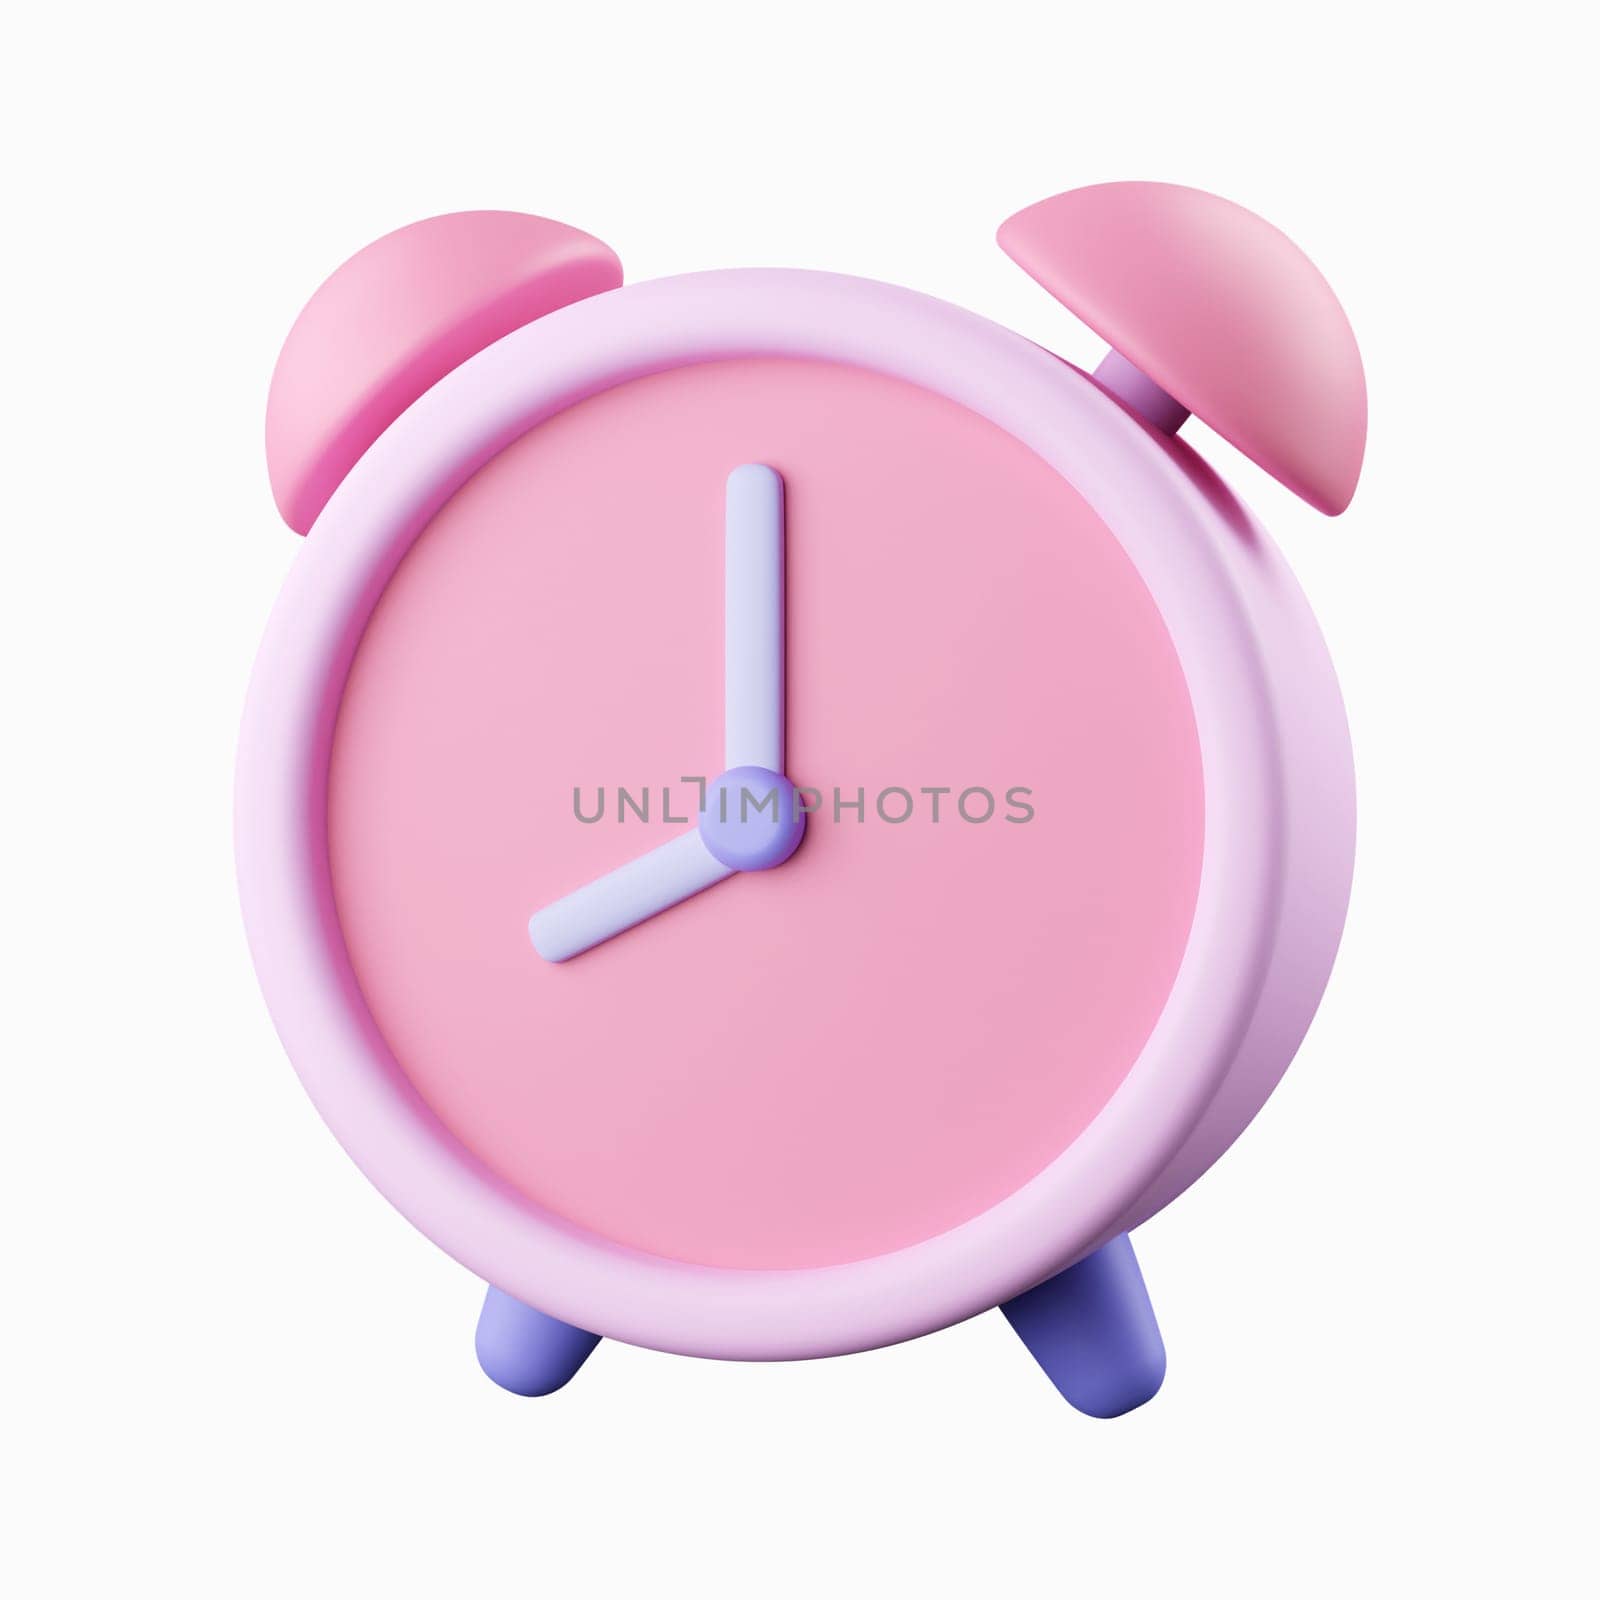 3d clock. Back to school and education concept. isolated on background, icon symbol clipping path. 3d render illustration by meepiangraphic